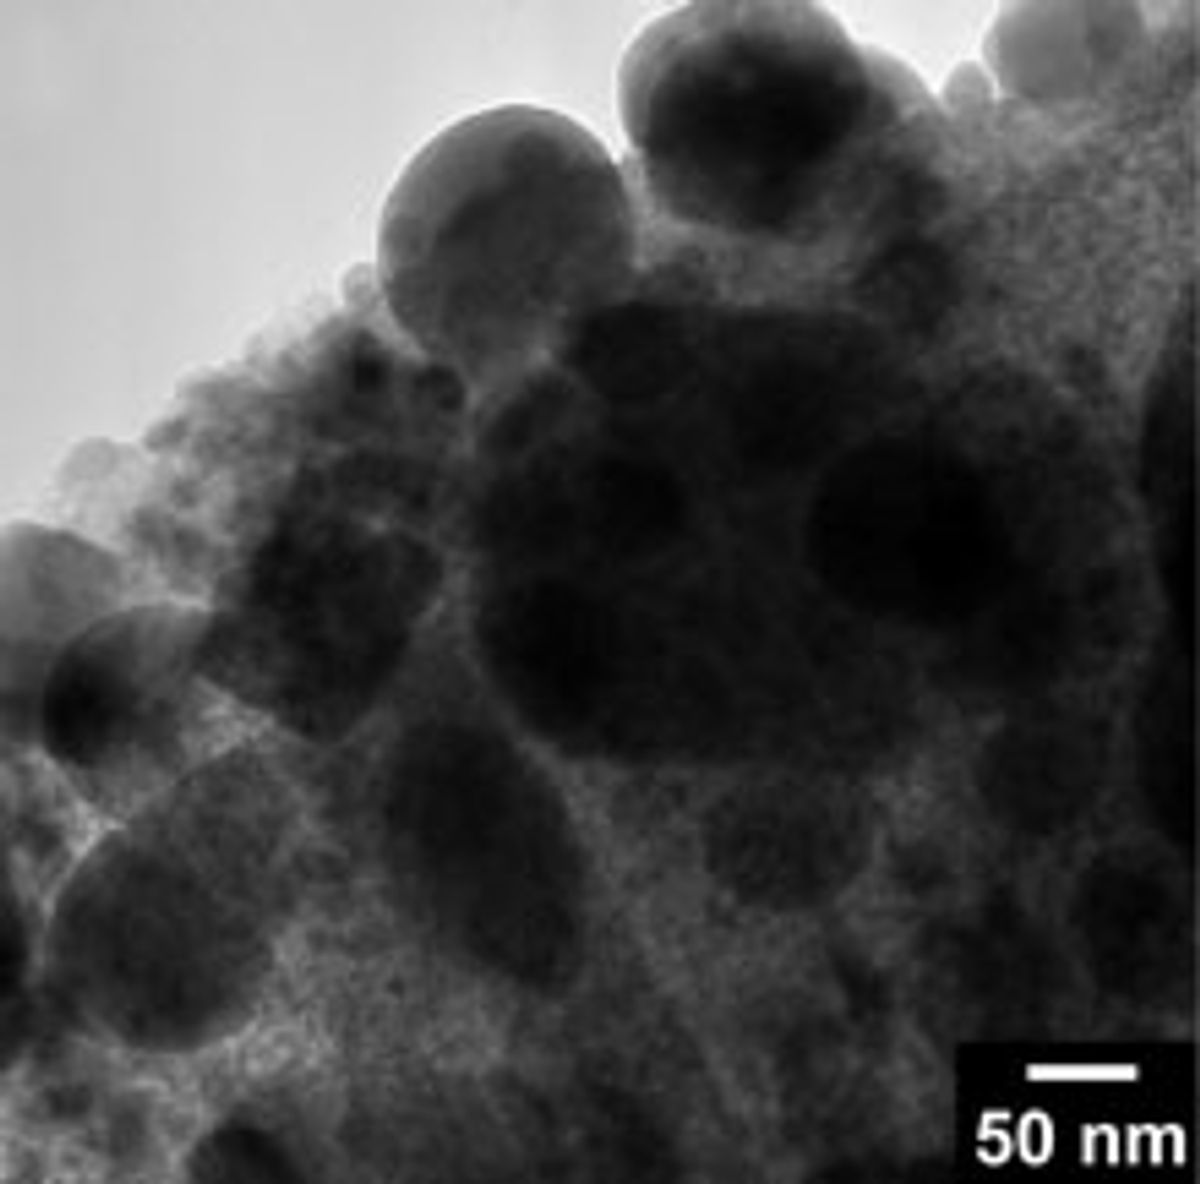 Commercial Interests for Nanoparticles in Li-Ion Batteries for Electrical Vehicles Heats Up